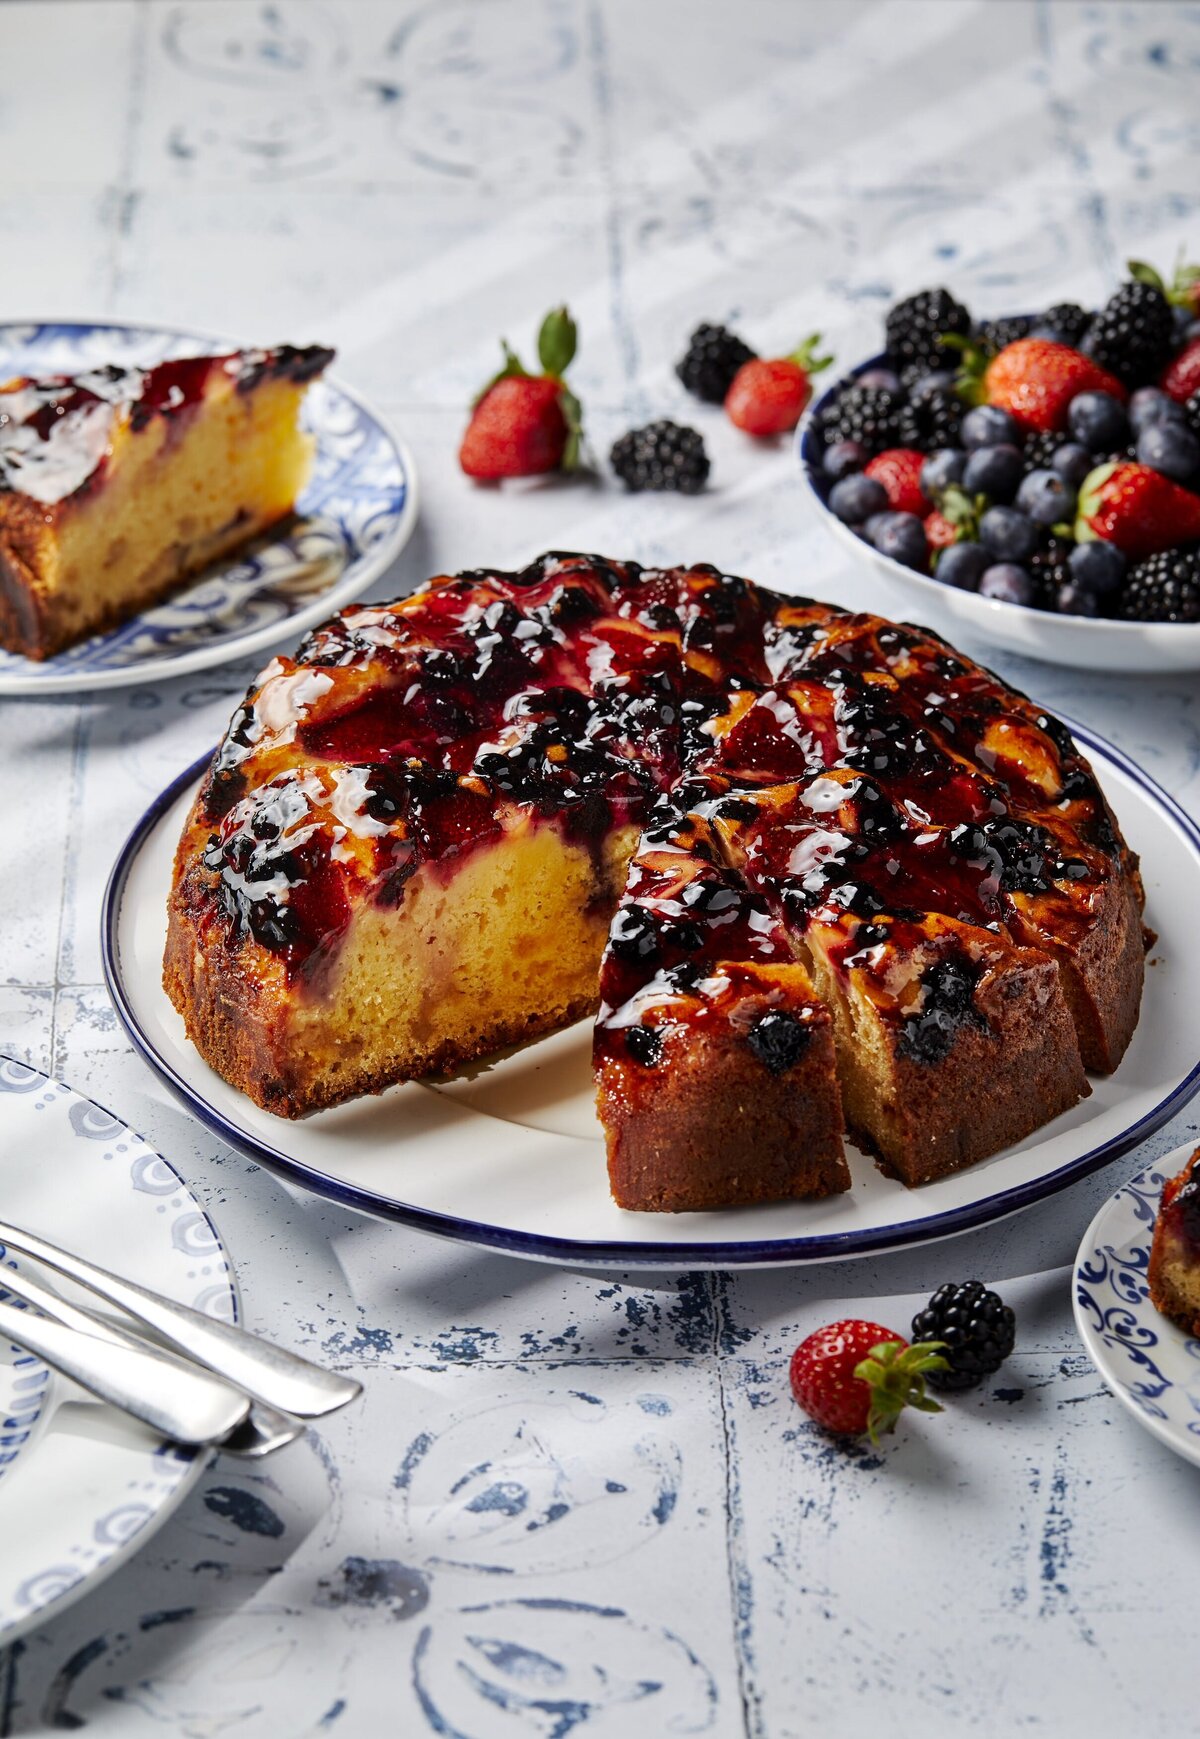 A round cake topped with a berry medley.